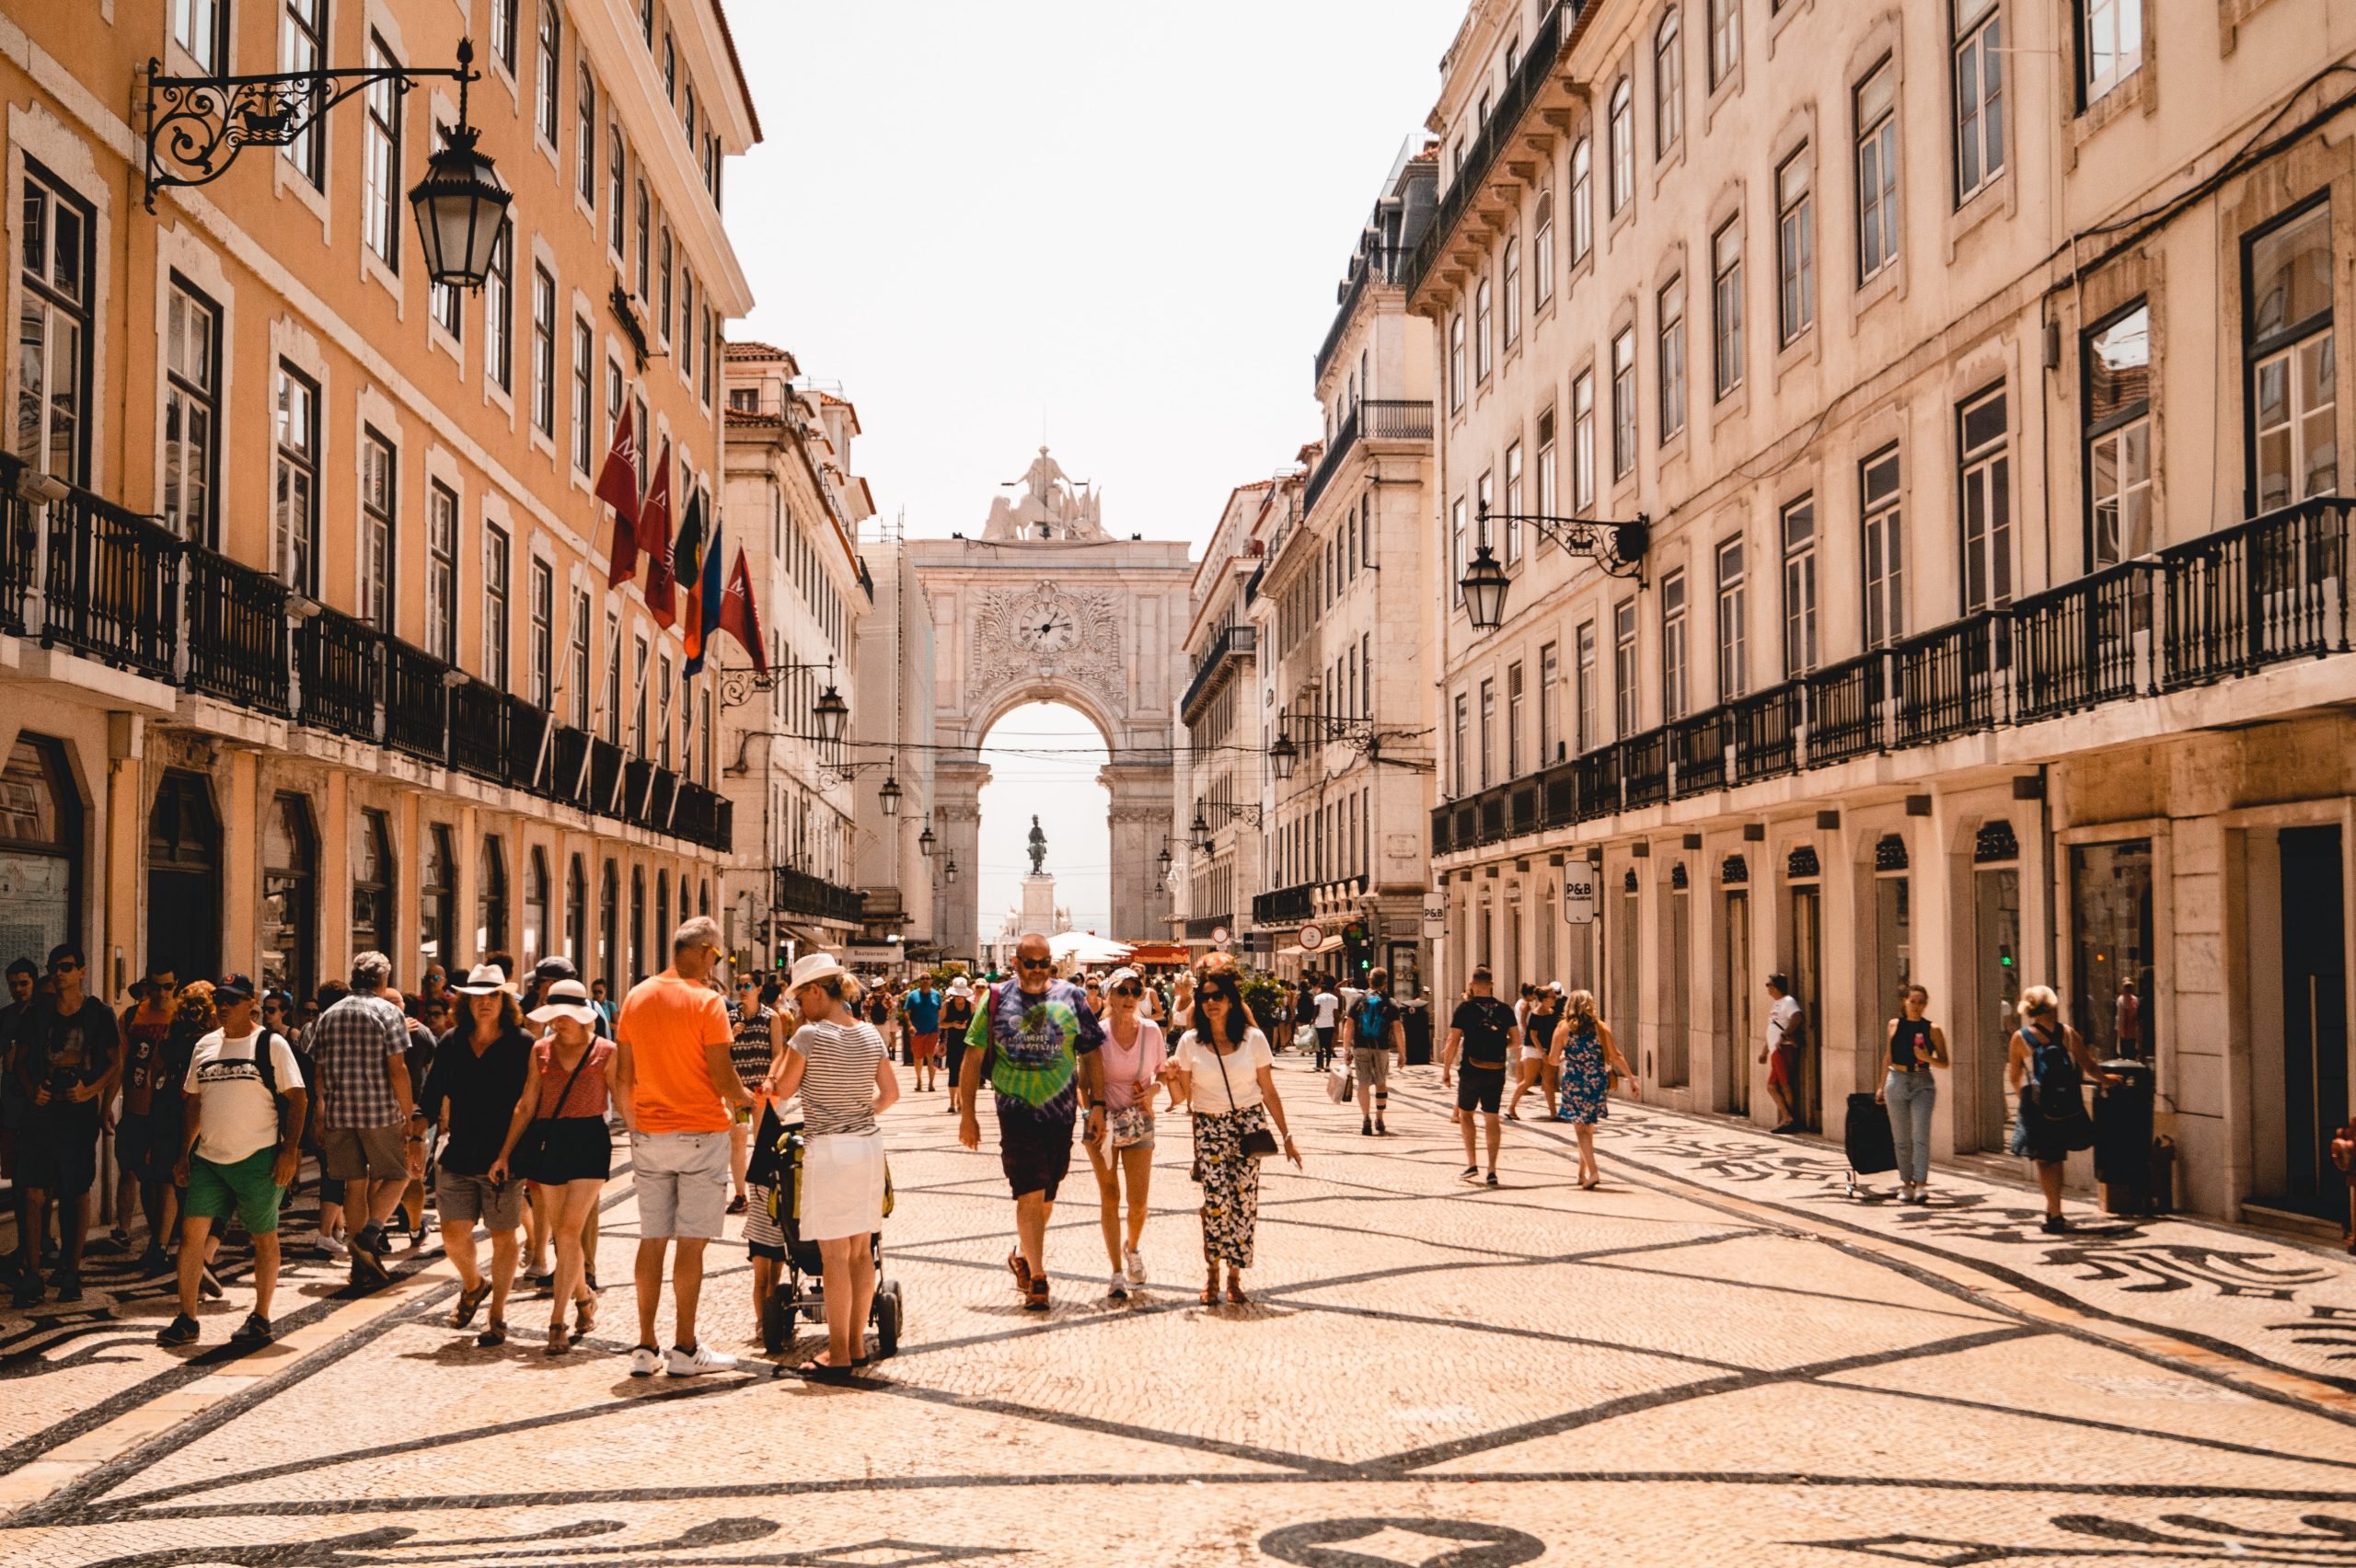 17 Fun Facts About Portugal That Will Shock You 